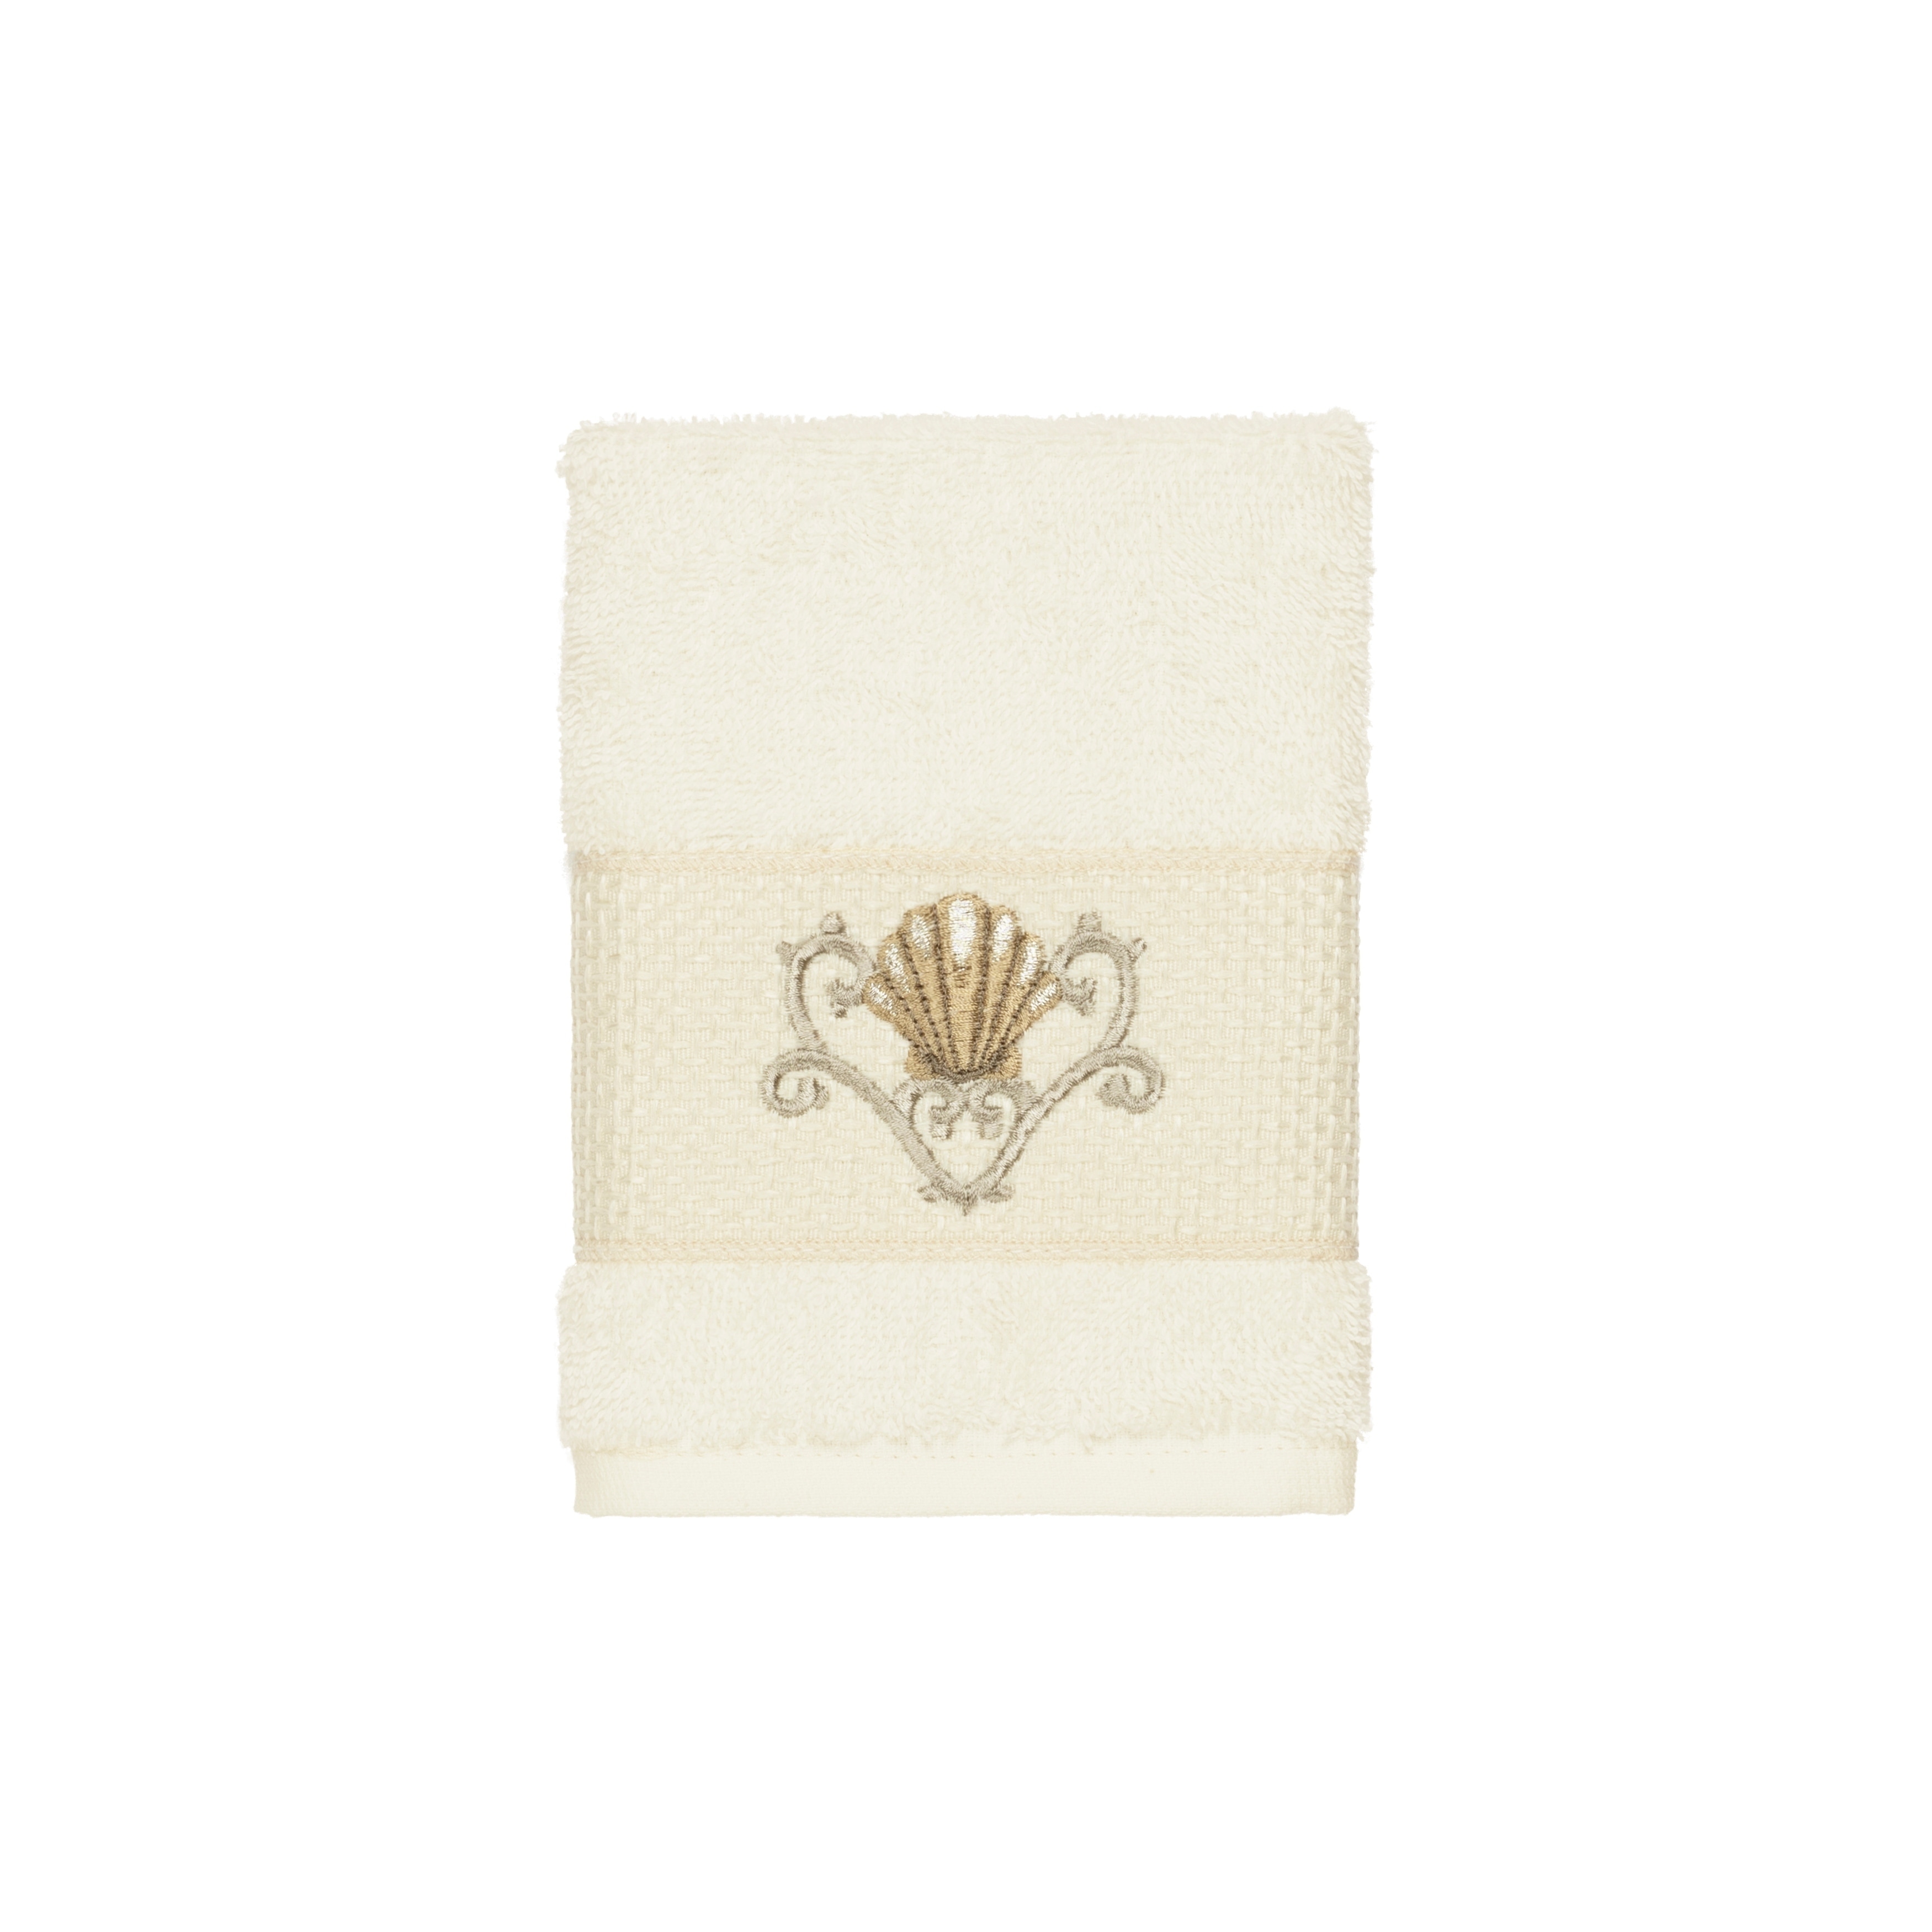 https://ak1.ostkcdn.com/images/products/21853566/Authentic-Hotel-and-Spa-Turkish-Cotton-Shells-Embroidered-Cream-3-piece-Towel-Set-e1d3db11-a89b-4f76-86e1-bee5b454e796.jpg